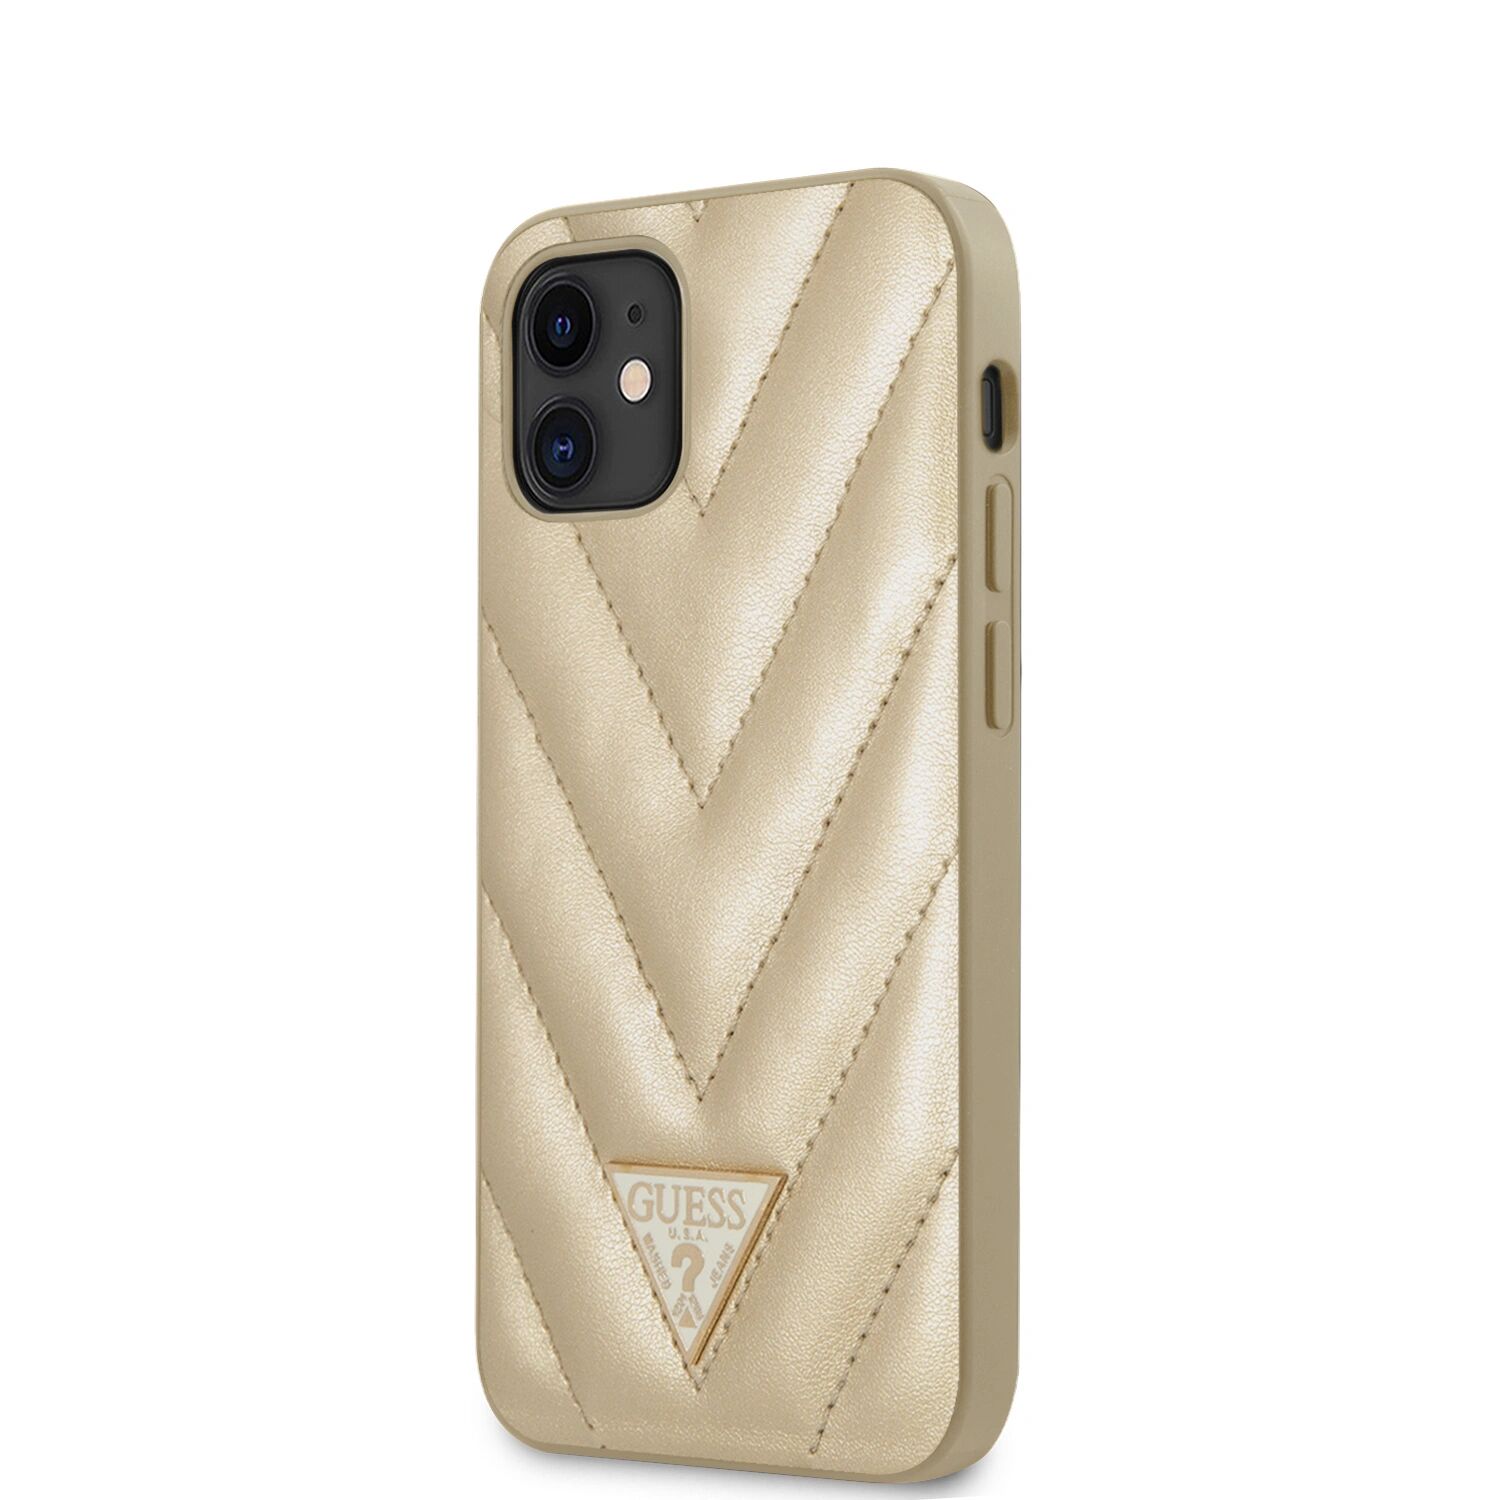 Guess Ochranný kryt pro iPhone 12 mini - Guess, V Quilted Gold